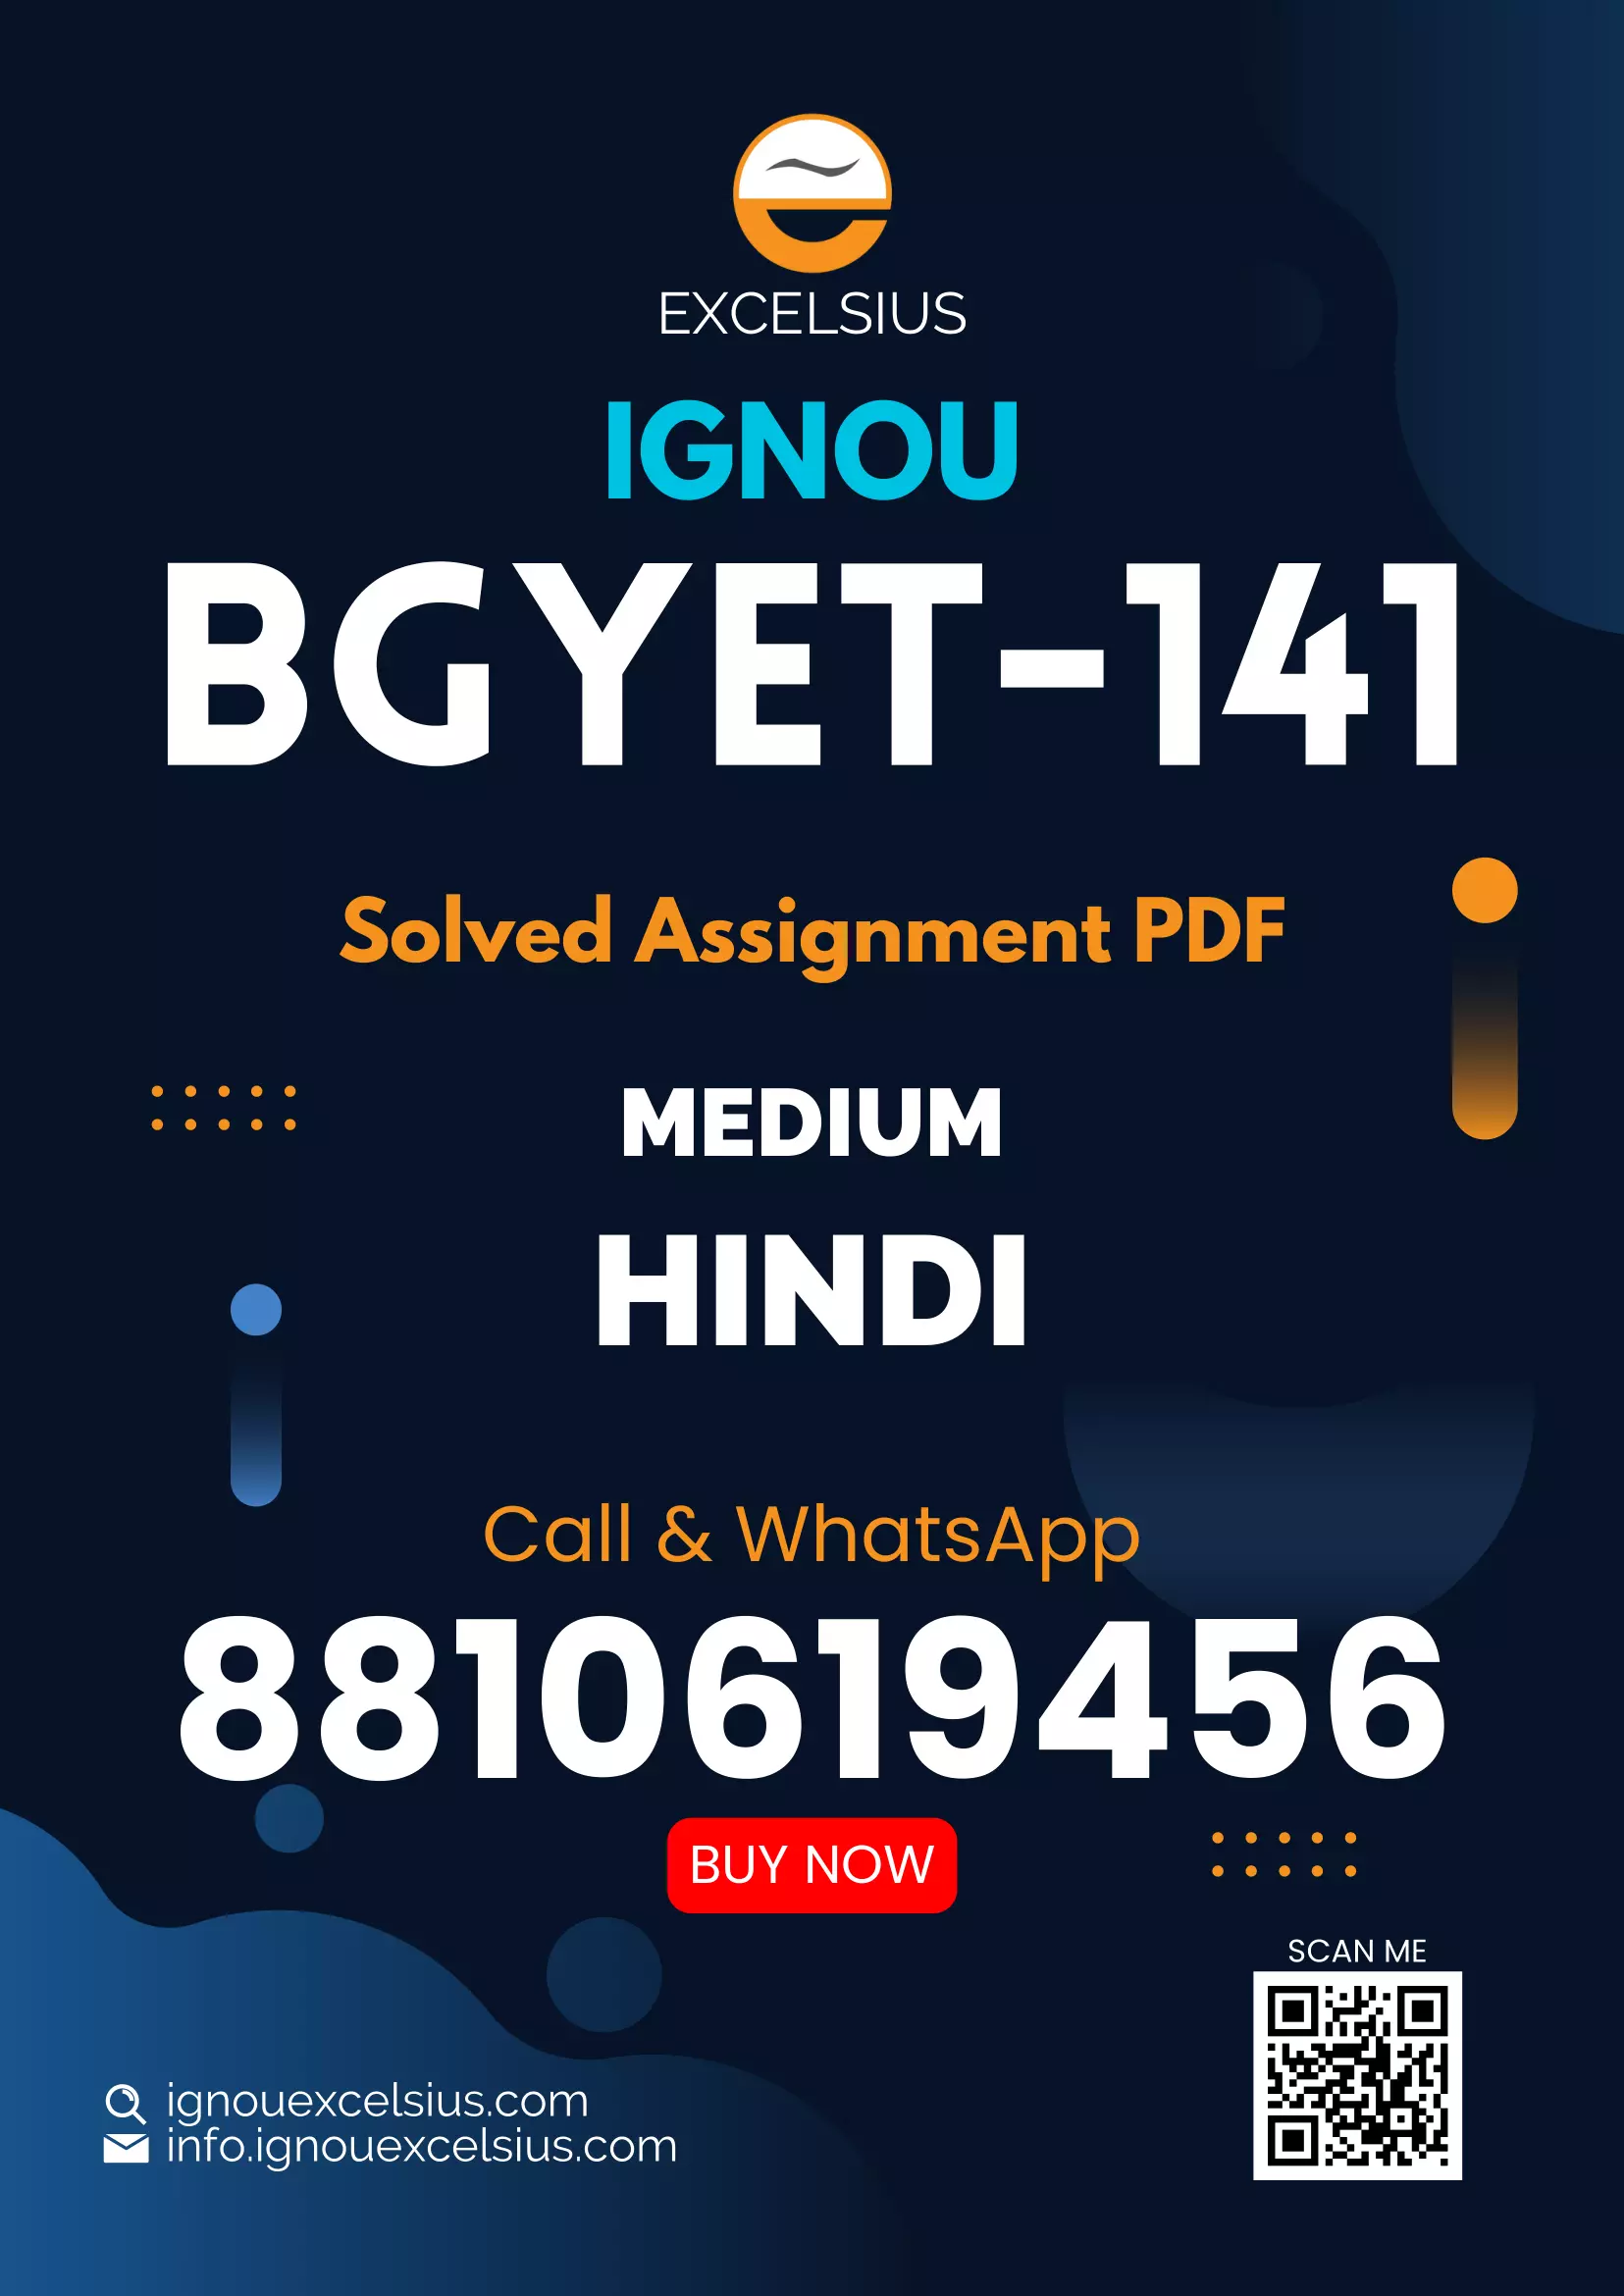 IGNOU BGYET-141 - Ore Geology and Industrial Minerals, Latest Solved Assignment-January 2023 - December 2023